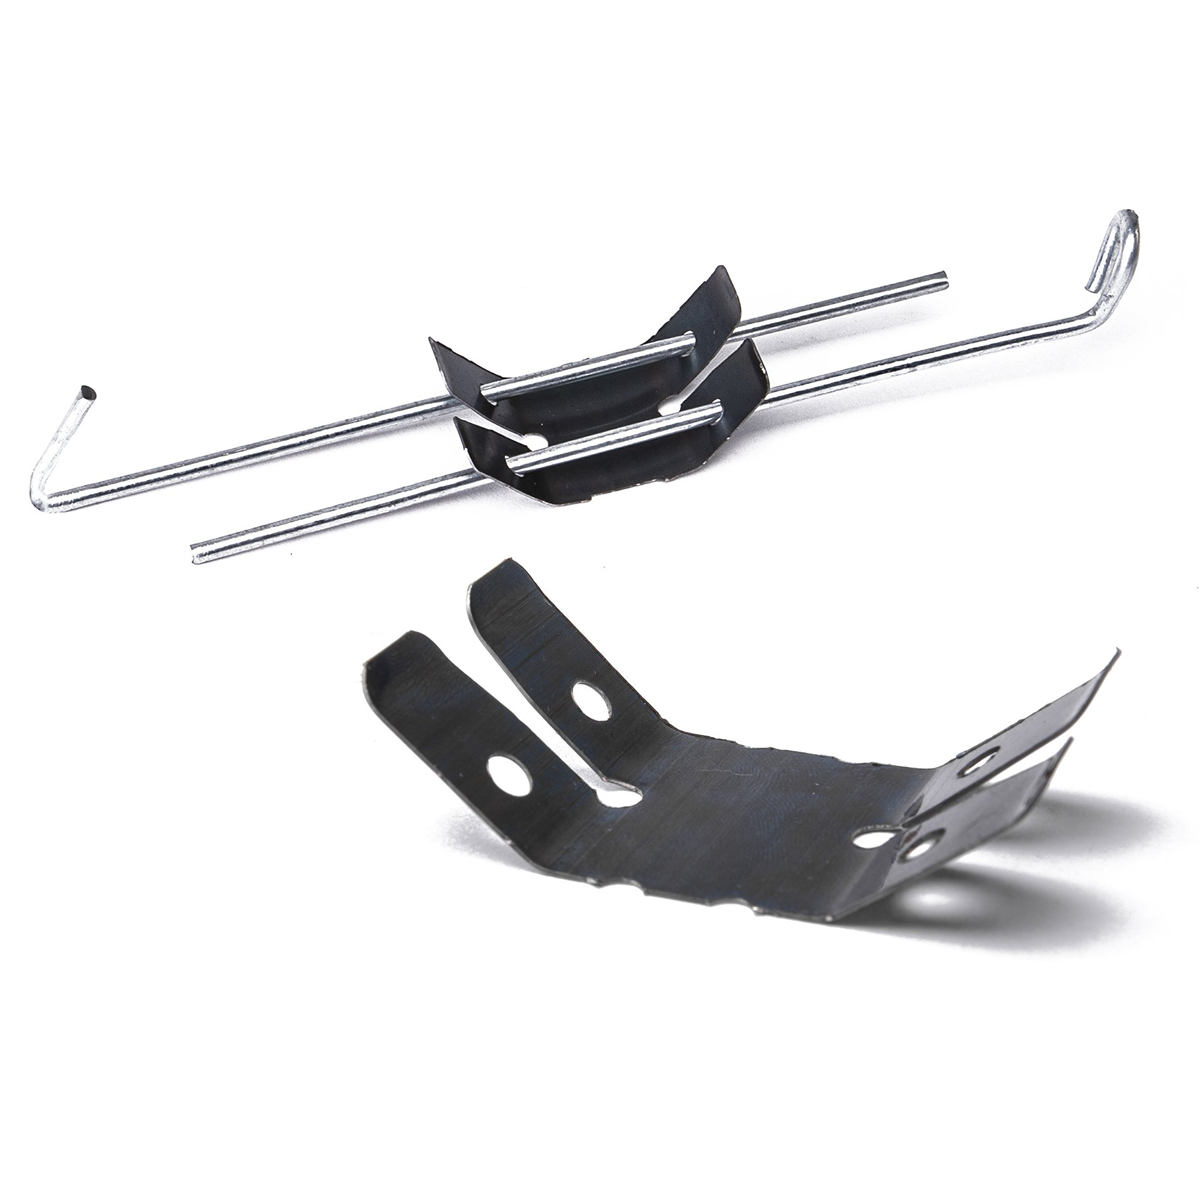 Tiger Double Spring Tongs